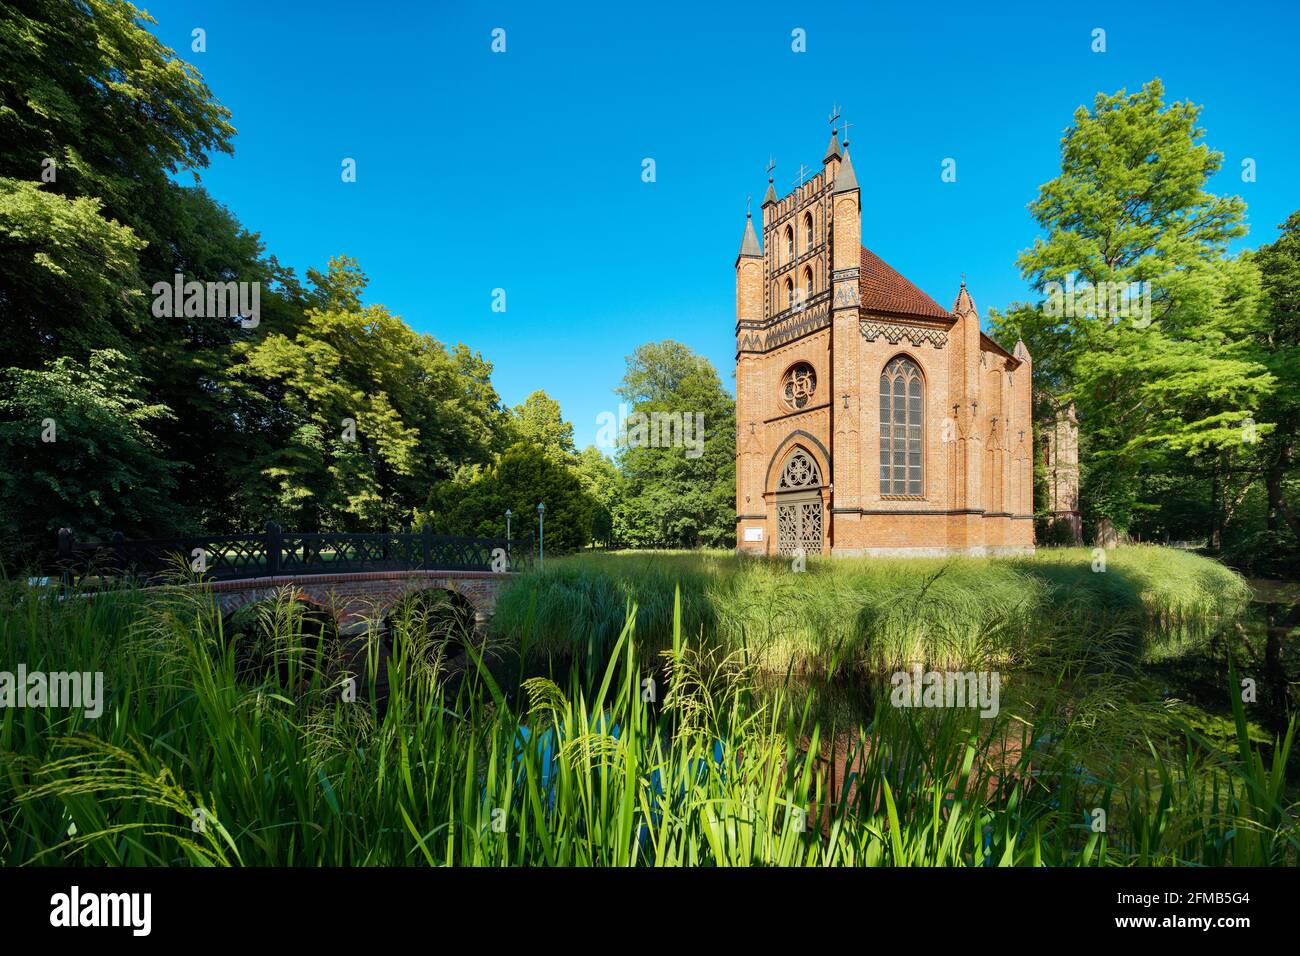 Germany, Mecklenburg-Western Pomerania, Catholic Church of St. Helena and Andreas, in the park of Ludwigslust Palace Stock Photo